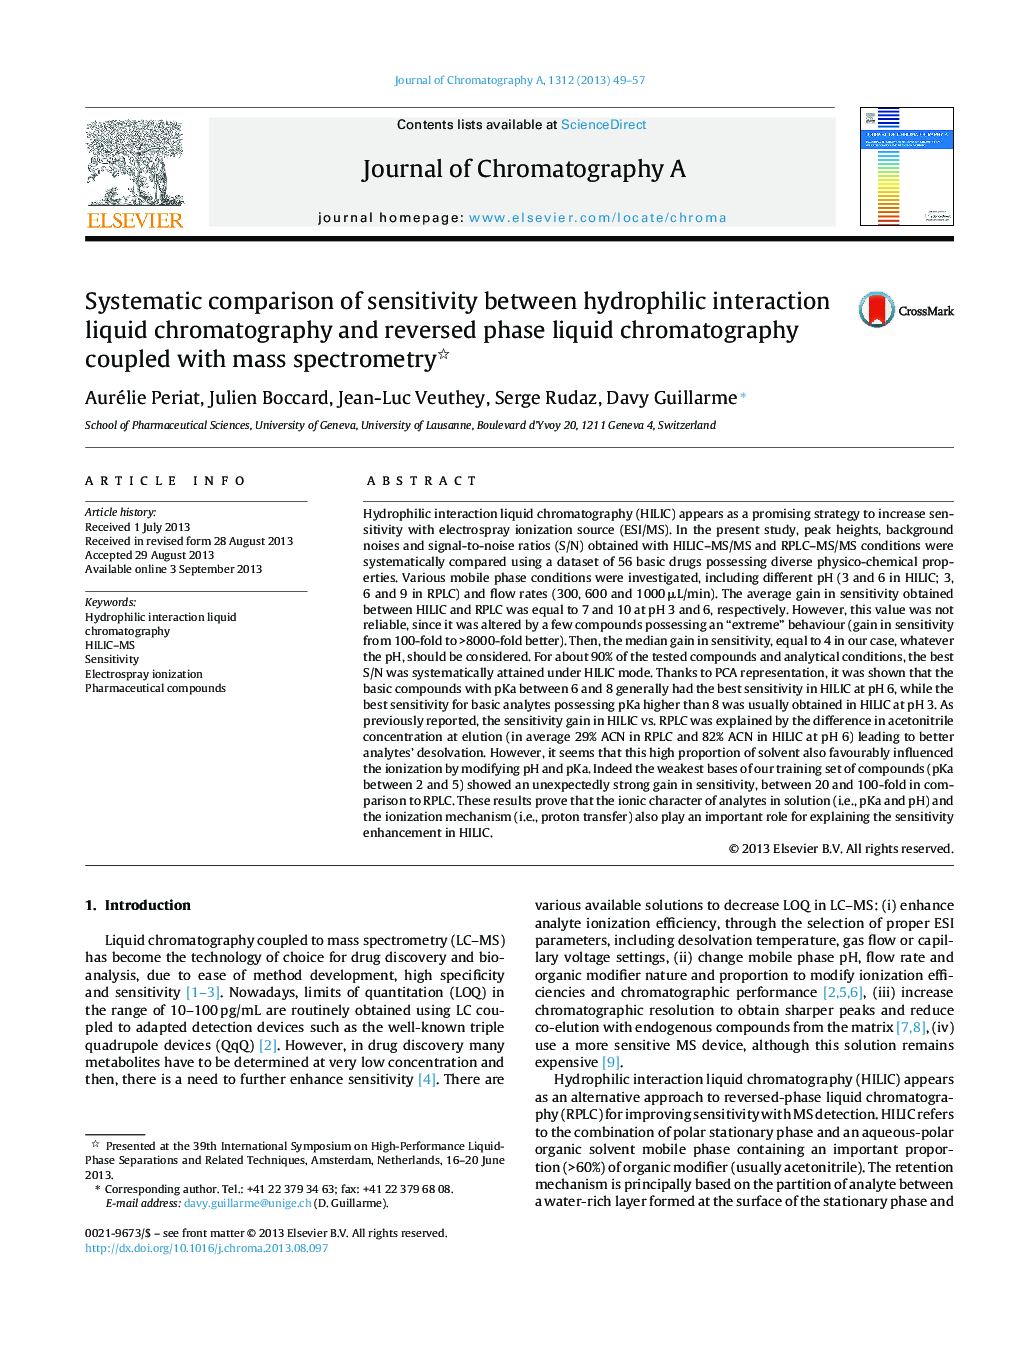 Systematic comparison of sensitivity between hydrophilic interaction liquid chromatography and reversed phase liquid chromatography coupled with mass spectrometry 